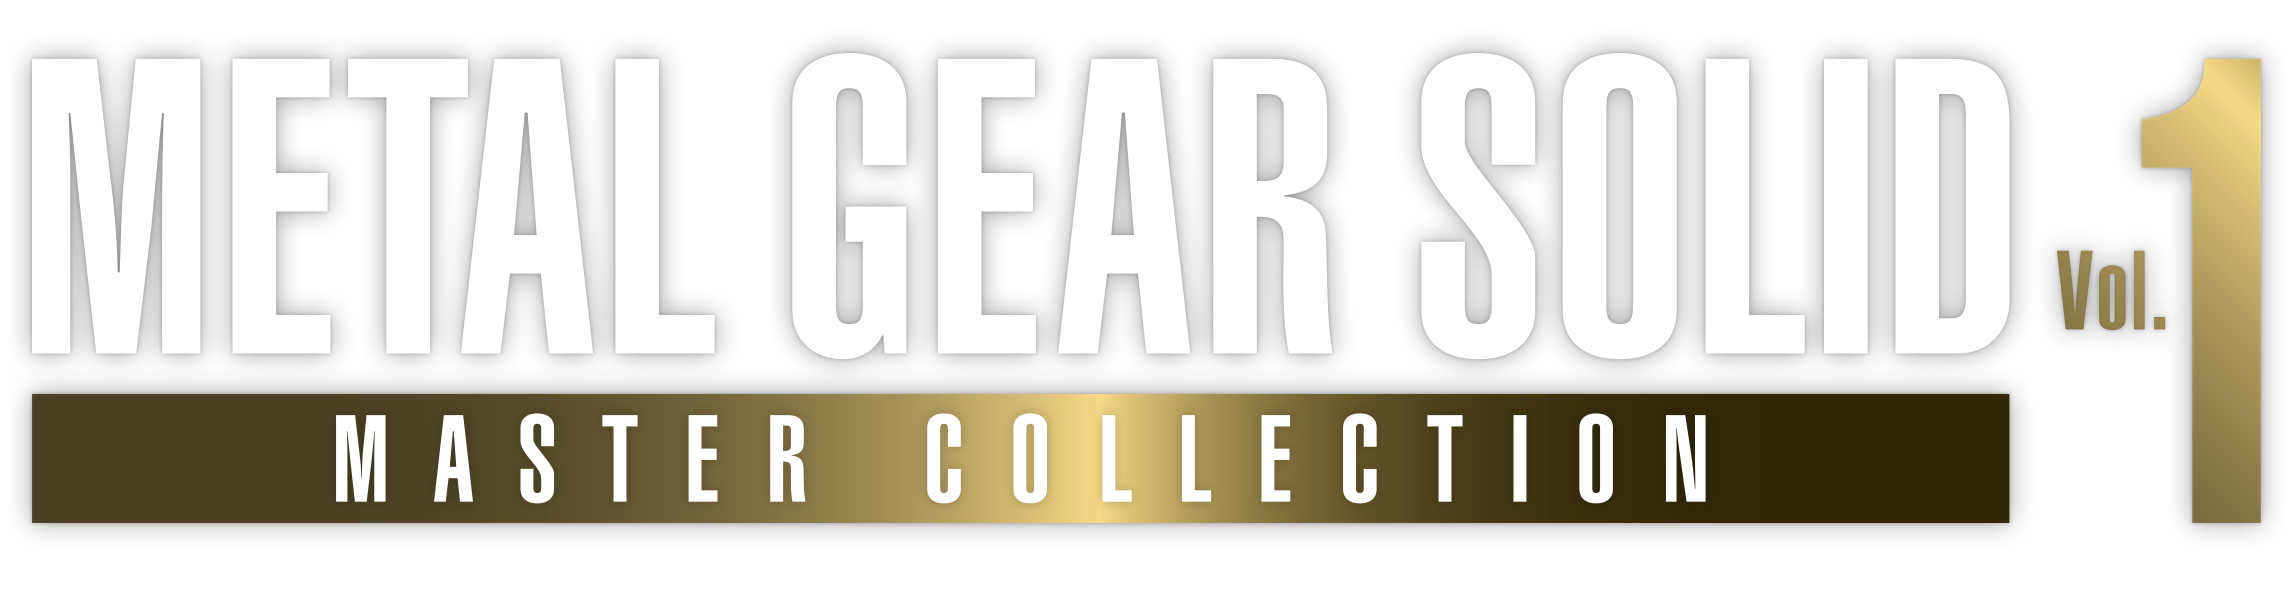 Metal Gear Solid: Master Collection Vol. 1 PS5 PlayStation 5, 2023 - New  Sealed 83717203551